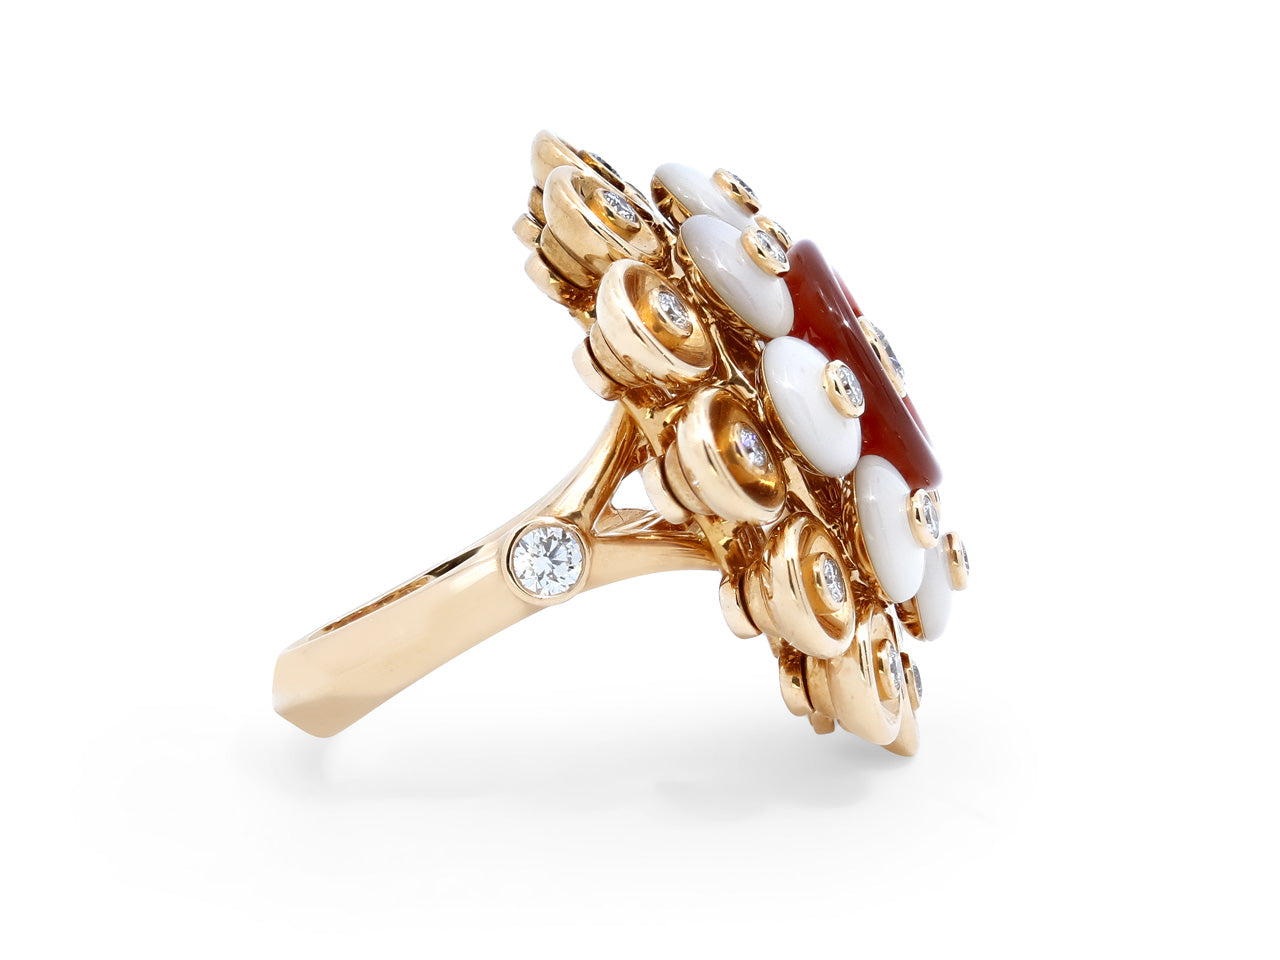 Van Cleef & Arpels 'Bouton d'or' Carnelian, Mother-of-Pearl and Diamond Ring in 18K Rose Gold